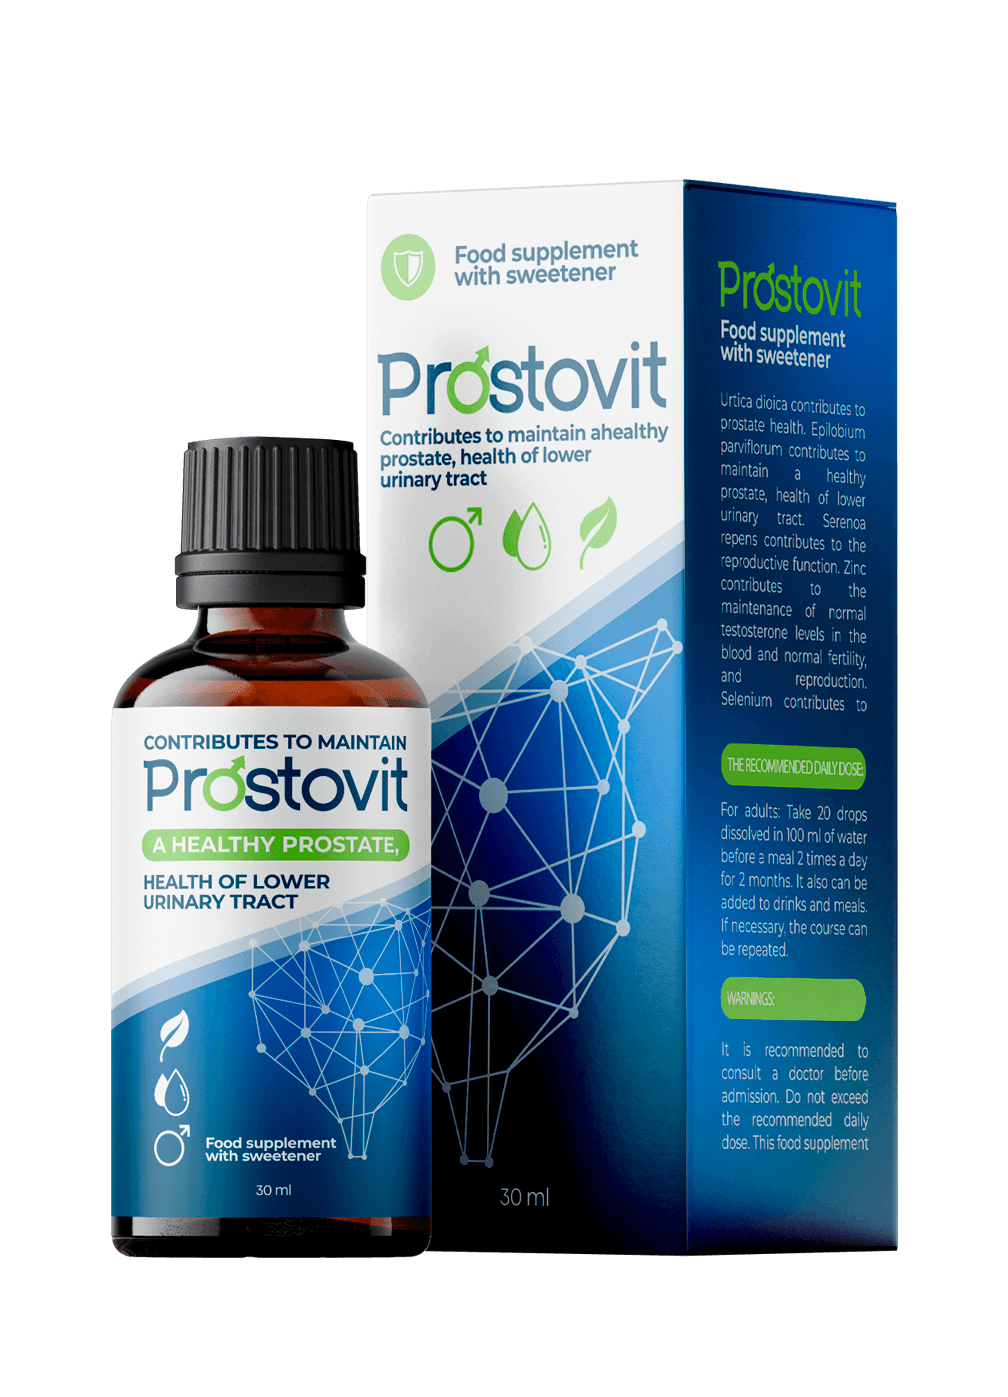 Prostovit Product Overview. What Is It?